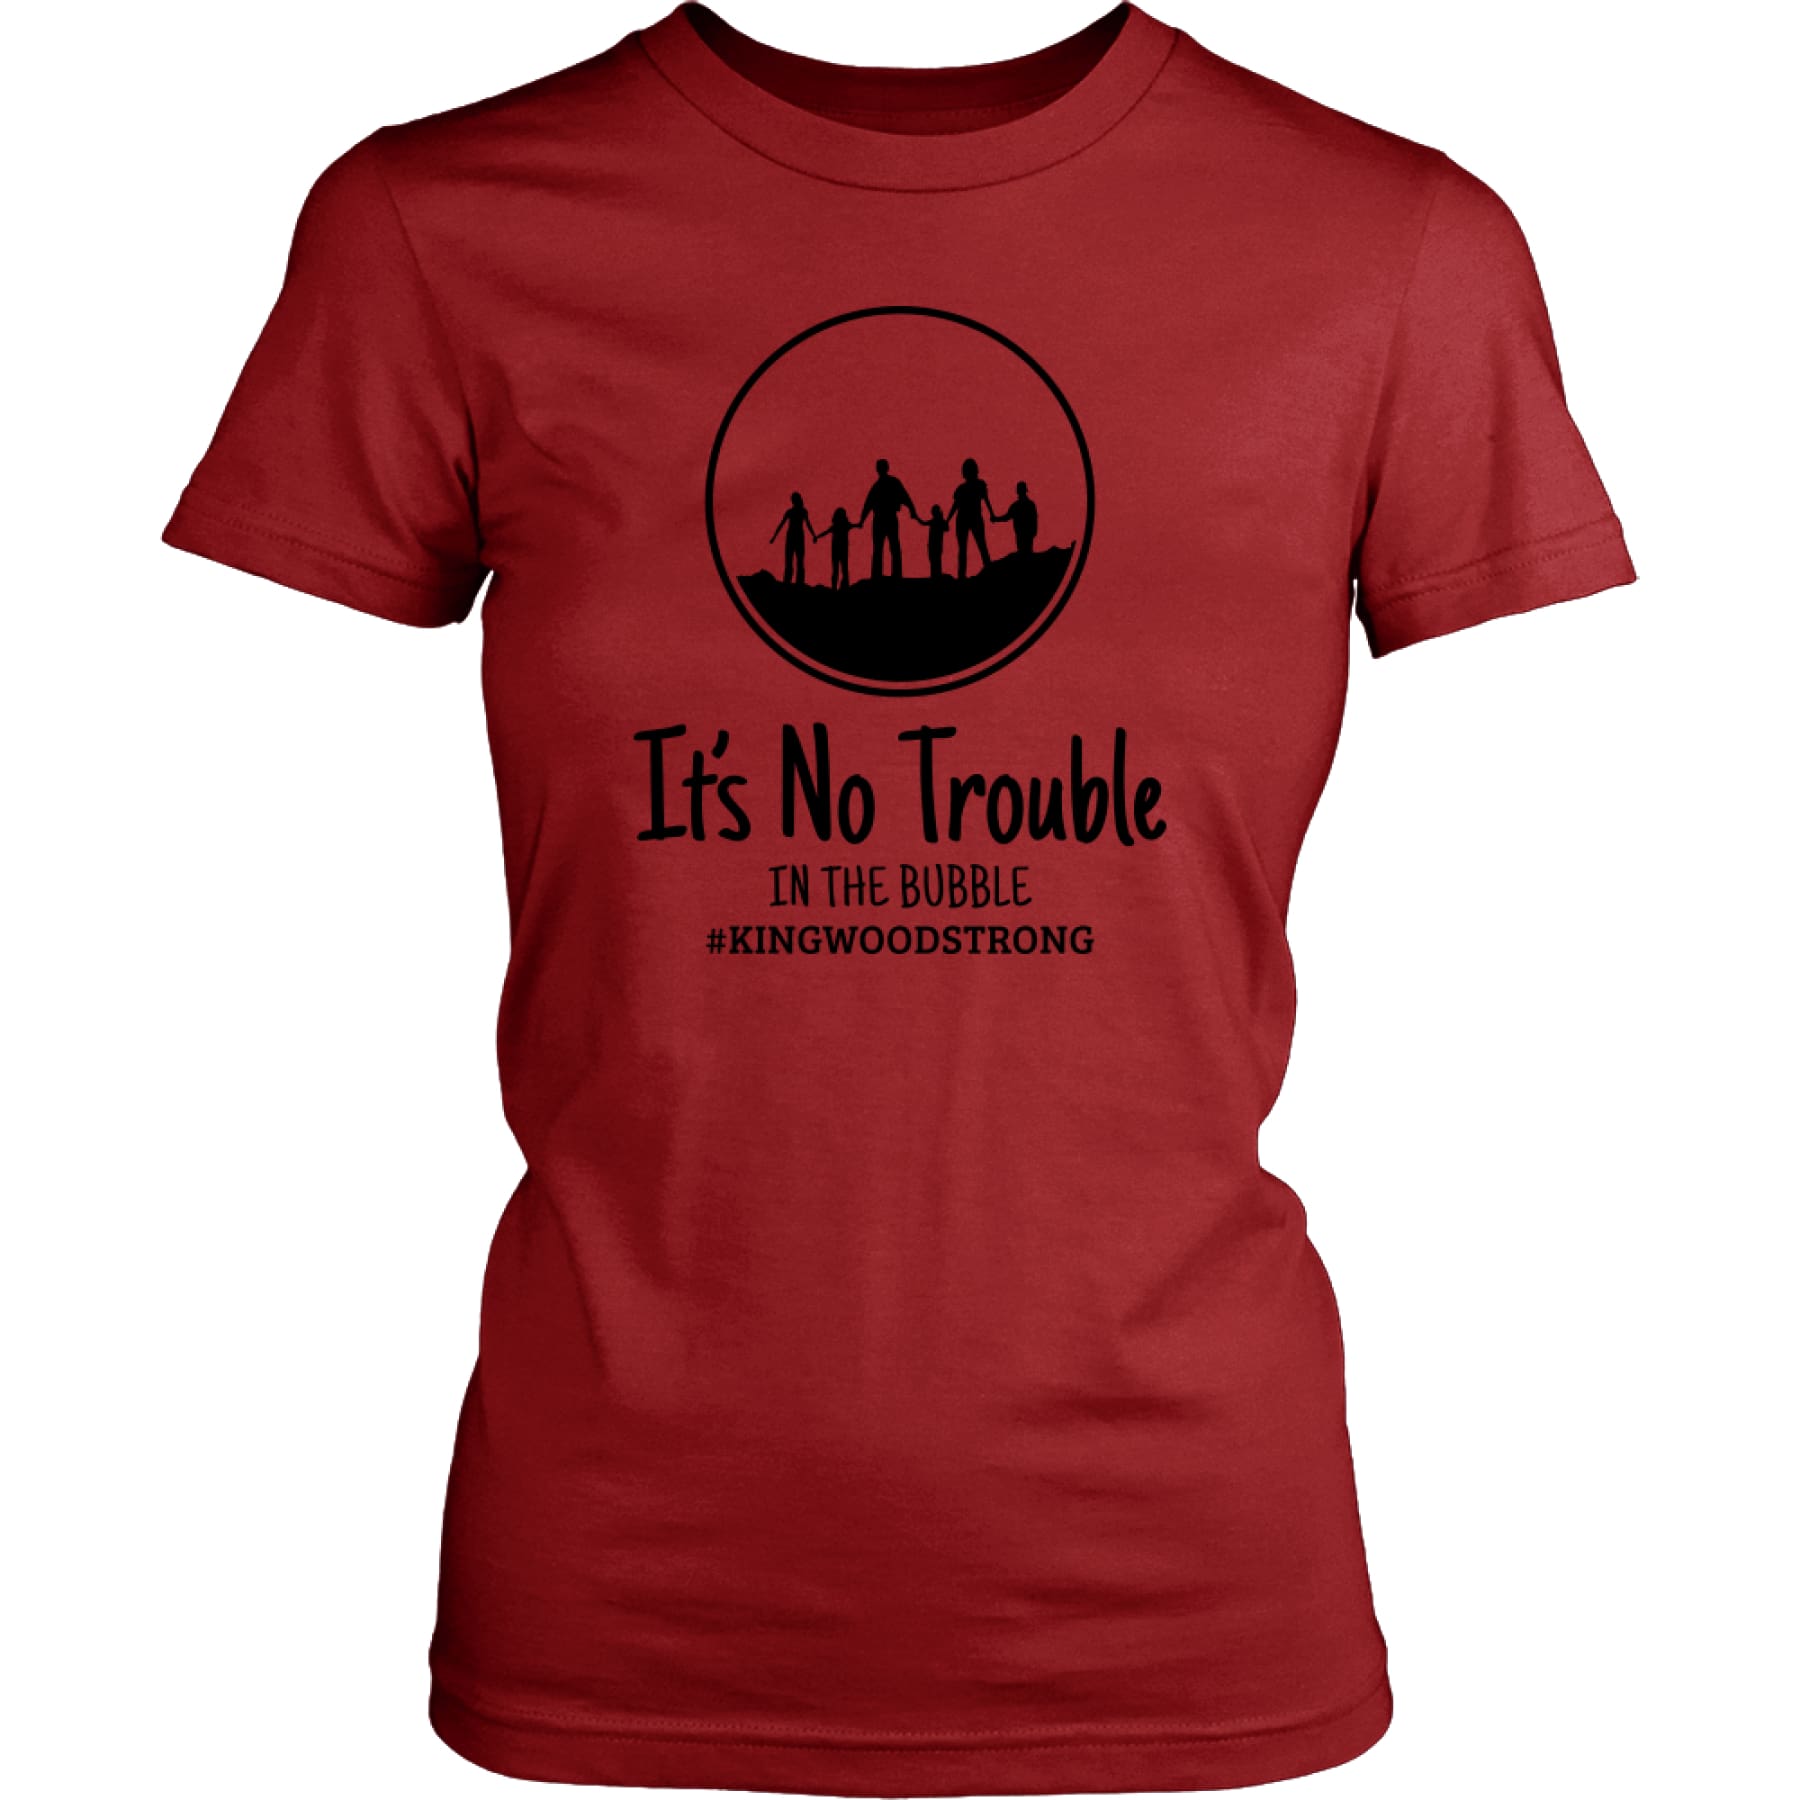 No Trouble in the Bubble ~ Kingwood Tee ~ 2 colors ~ 2 styles,Graphic Tee - Dirt Road Divas Boutique